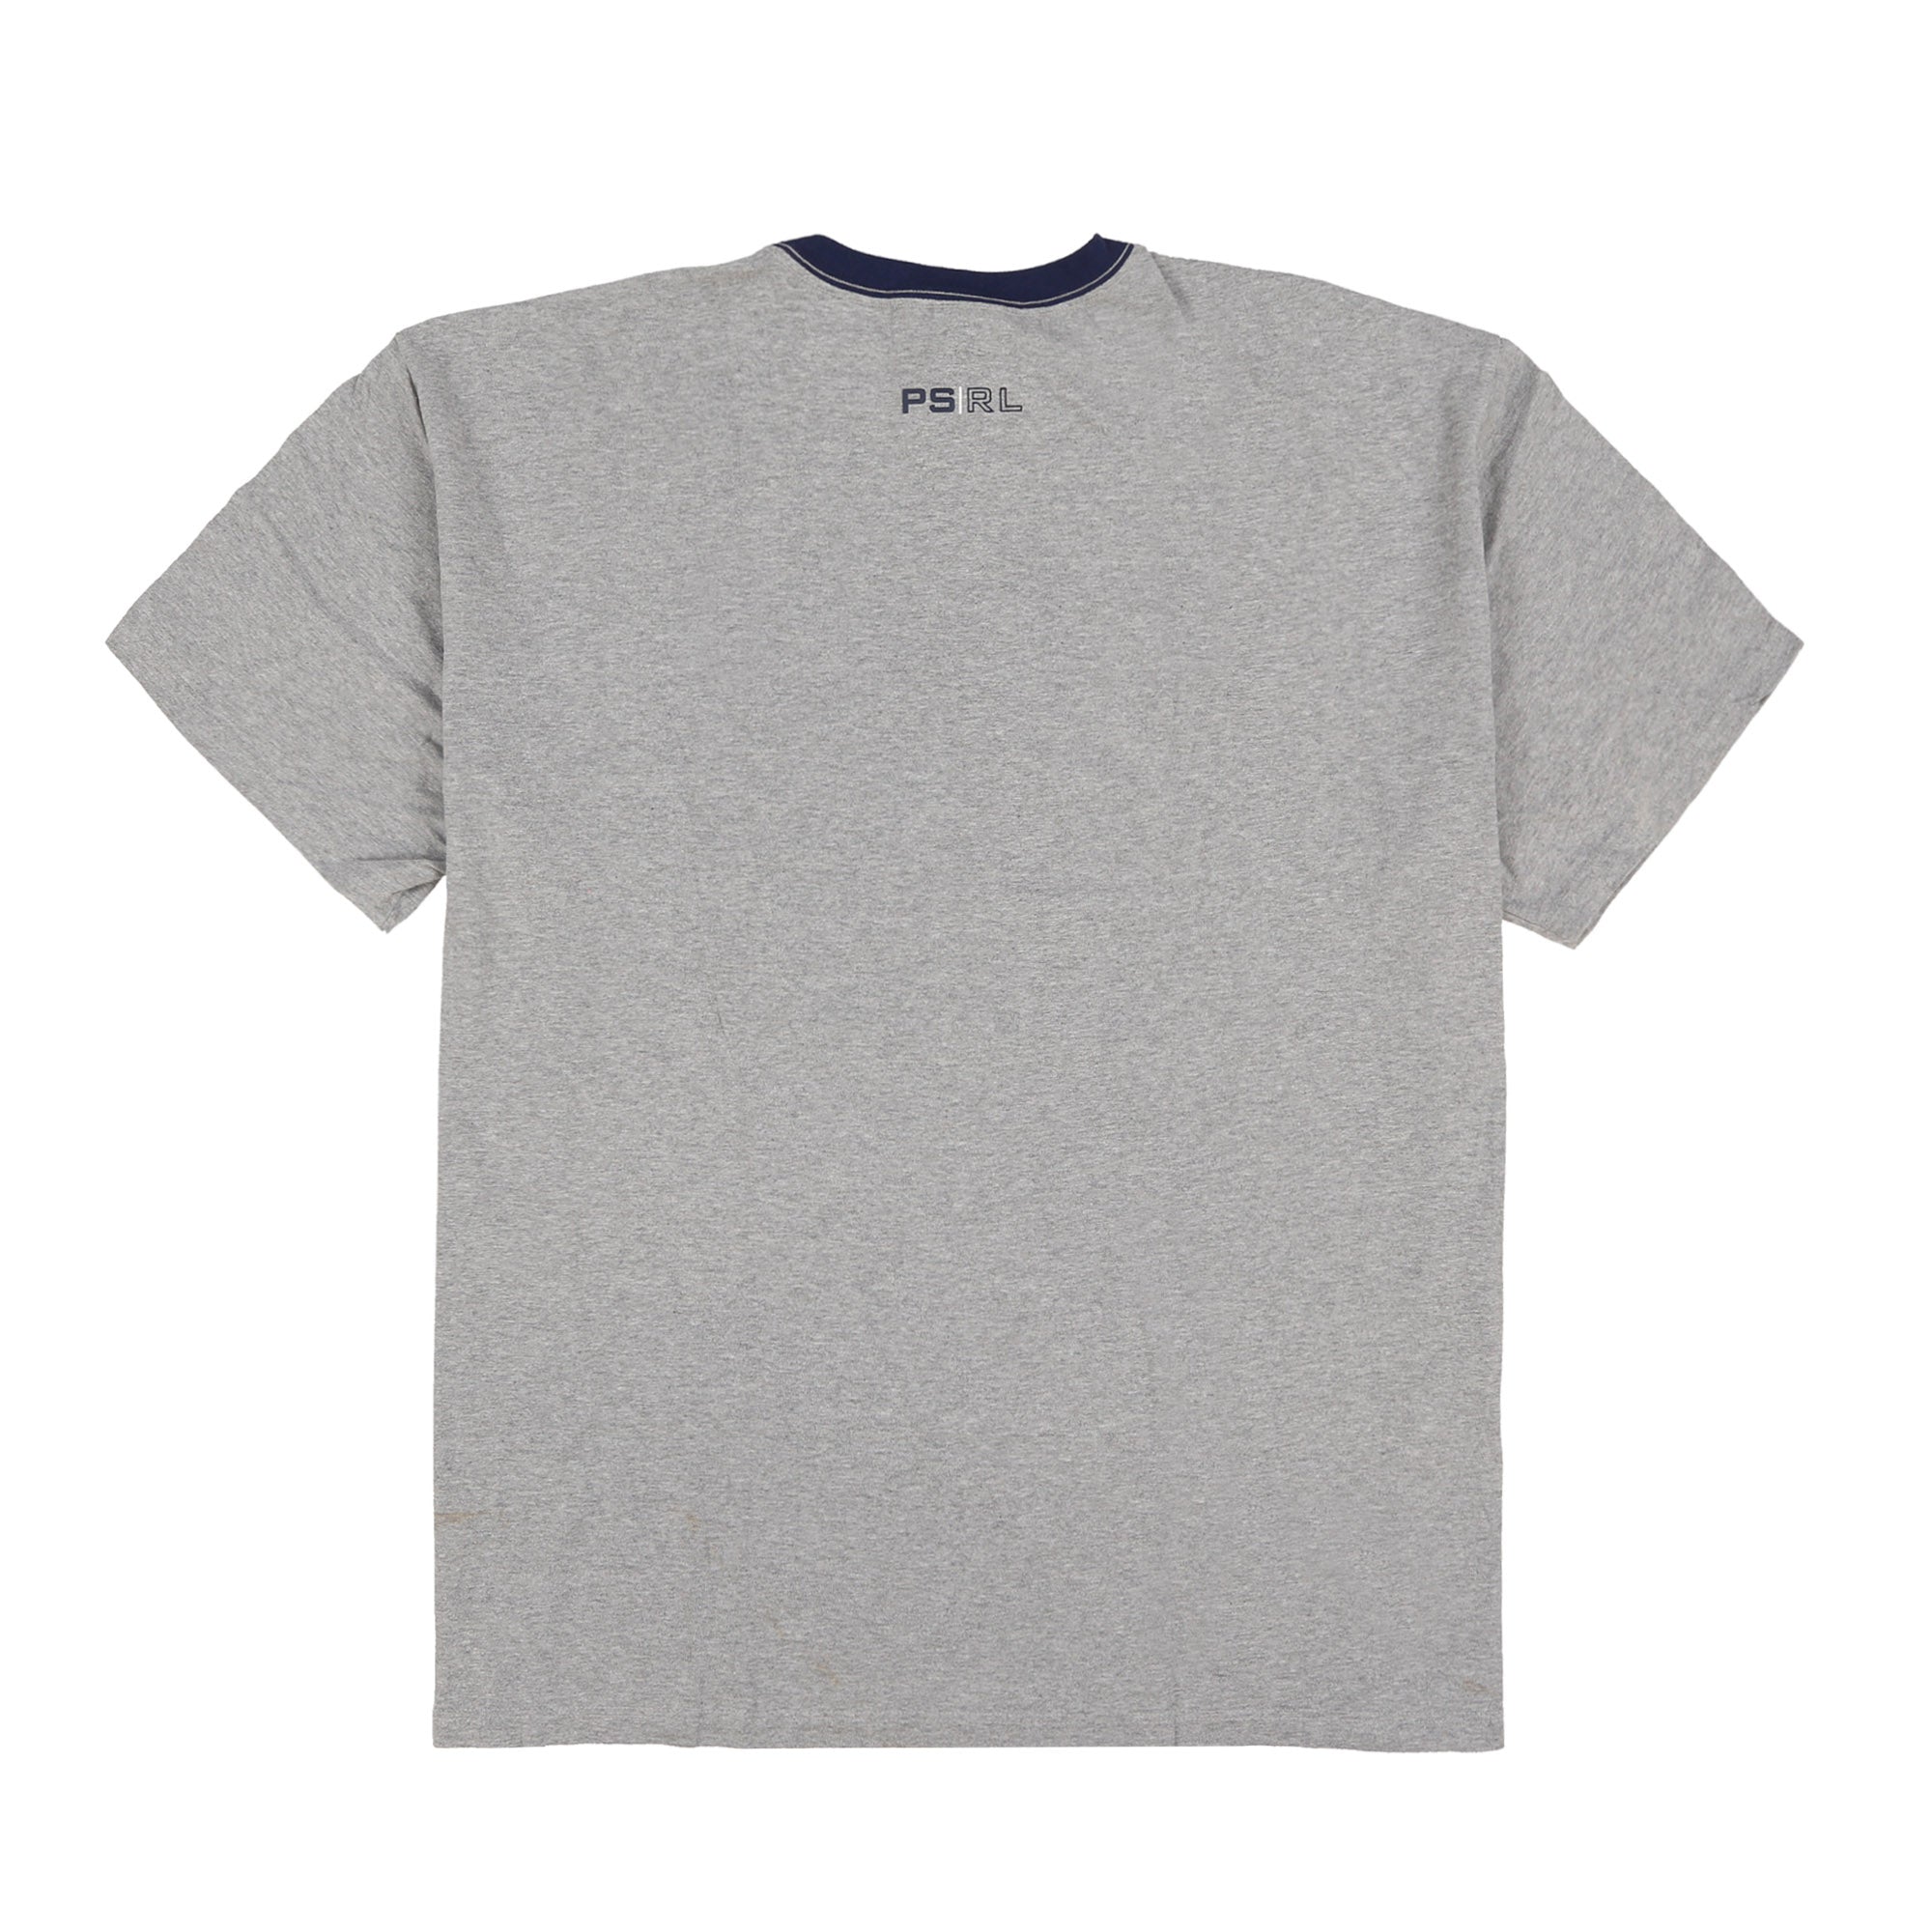 POLO PLASTIC SPELL OUT RINGER TEE // HEATHER